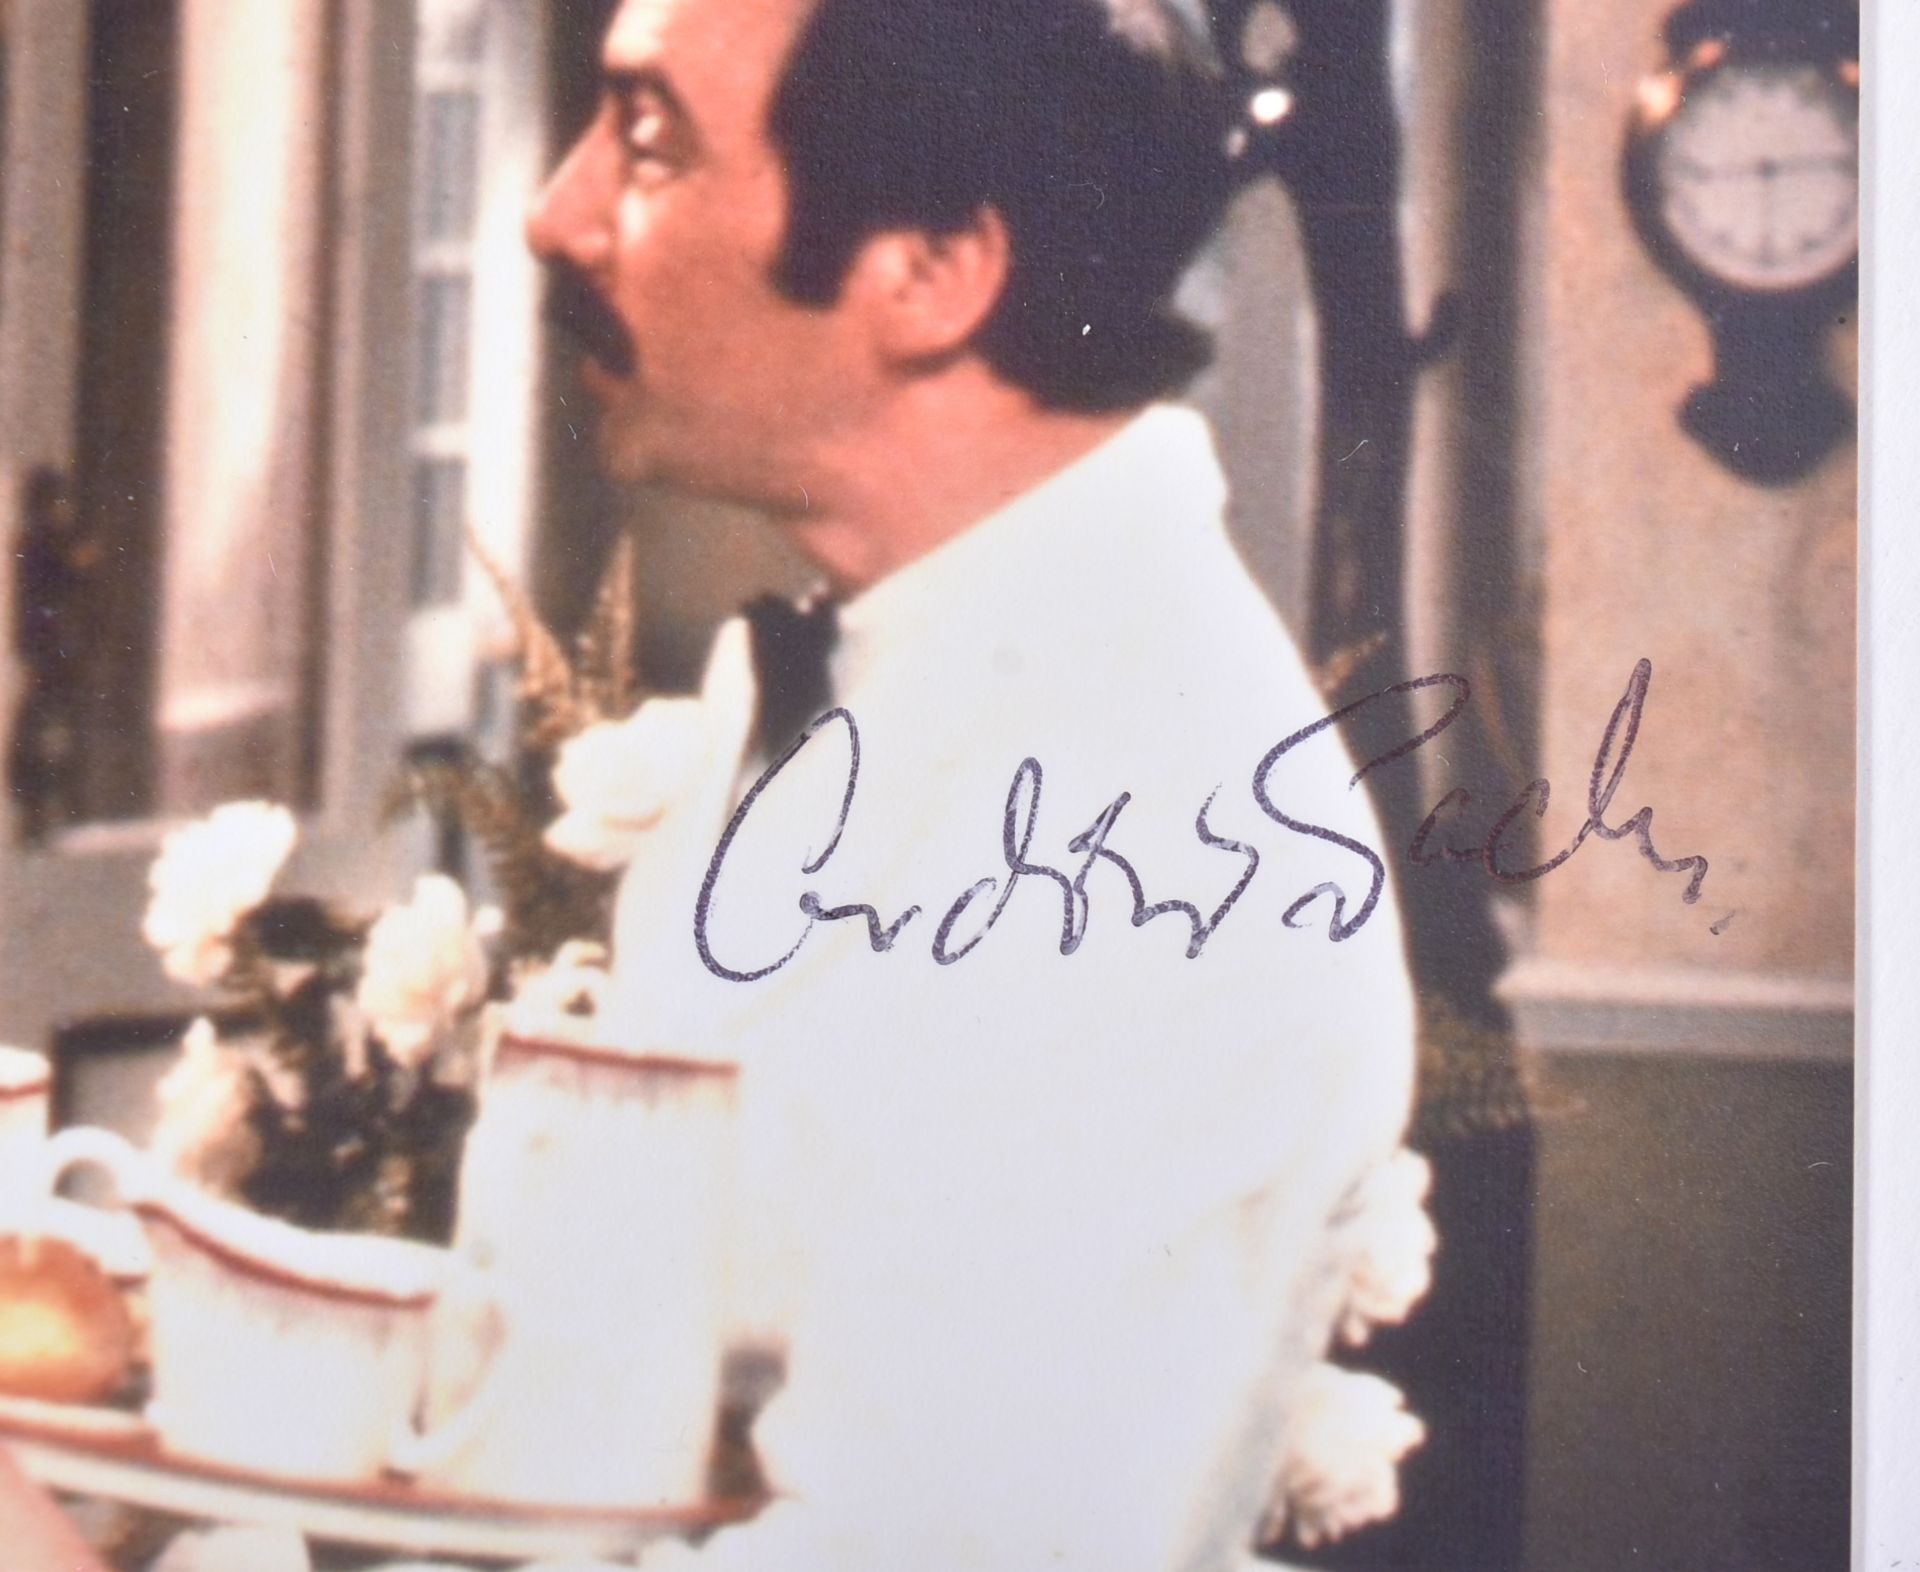 FAWLTY TOWERS - ANDREW SACHS (MANUEL) SIGNED PHOTOGRAPH - Image 2 of 2